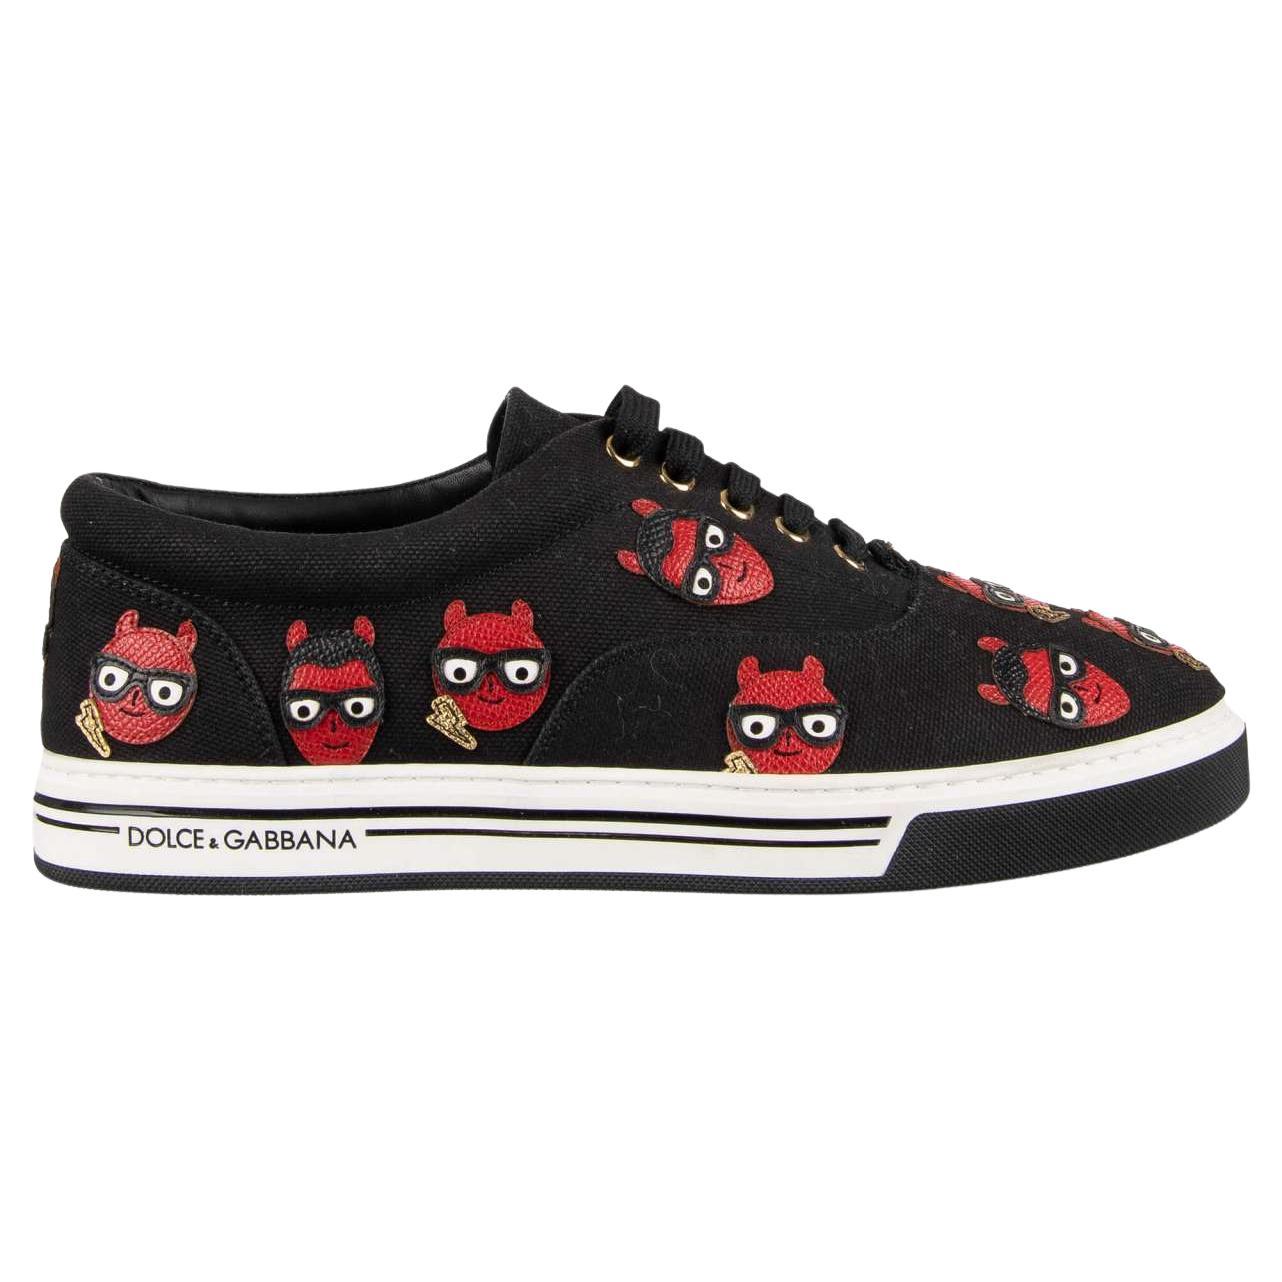 Dolce & Gabbana Low-Top Canvas Sneaker ROMA with Leather Embroidery Black EUR 41 For Sale